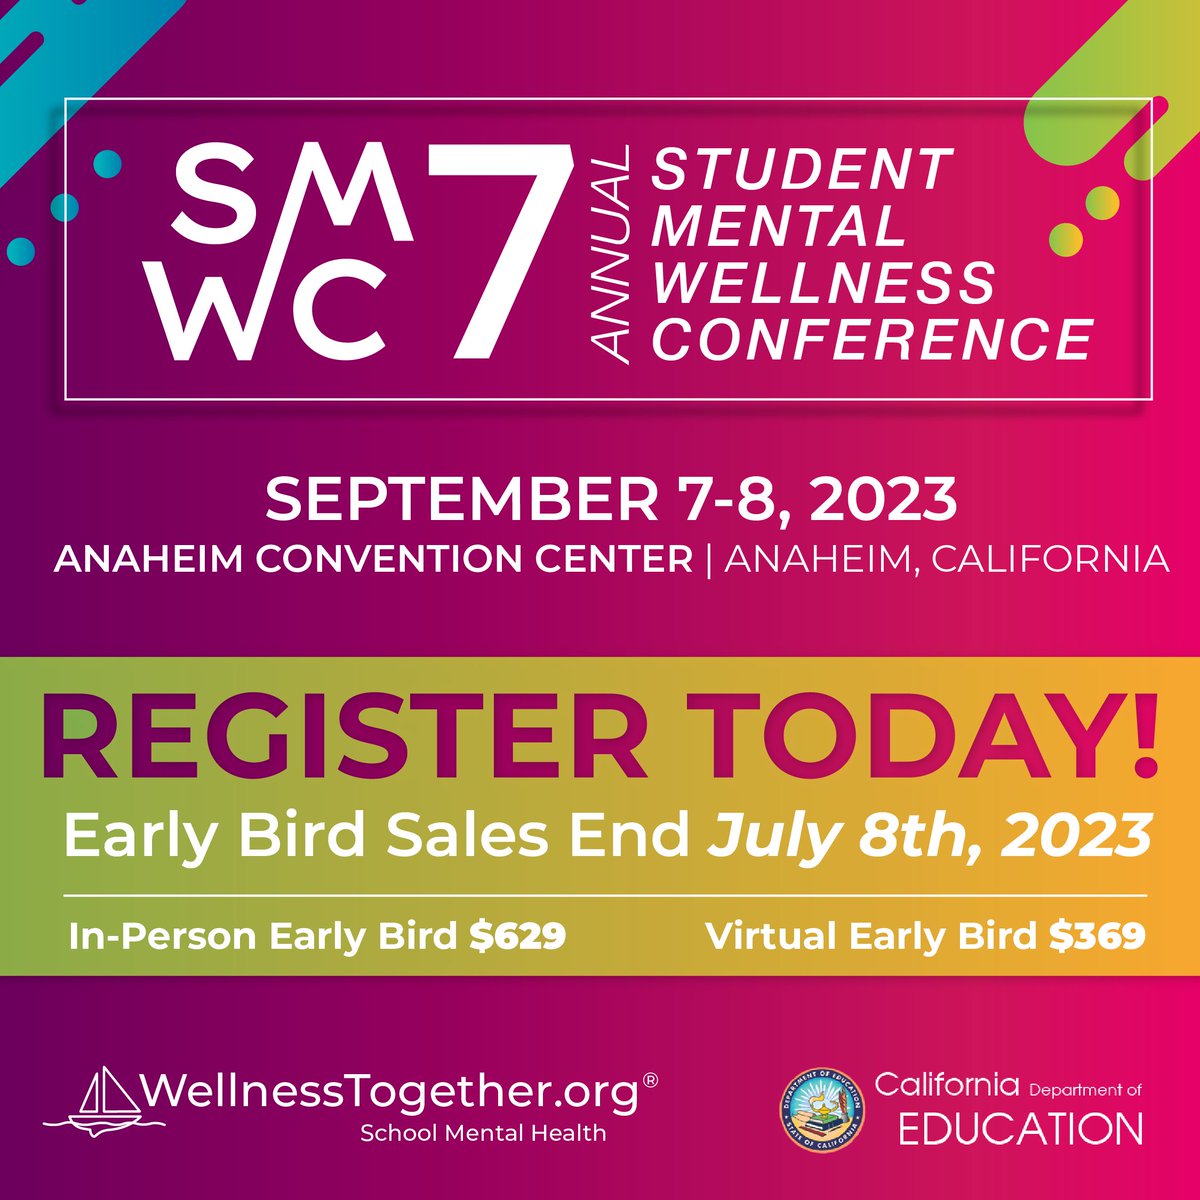 Early Bird Sales End July 8th, 2023!!

Secure your spot to #SMWC7 TODAY 🎉

#SMWC #SMWC7 #StudentMentalWellness #Conference #WellnessTogether